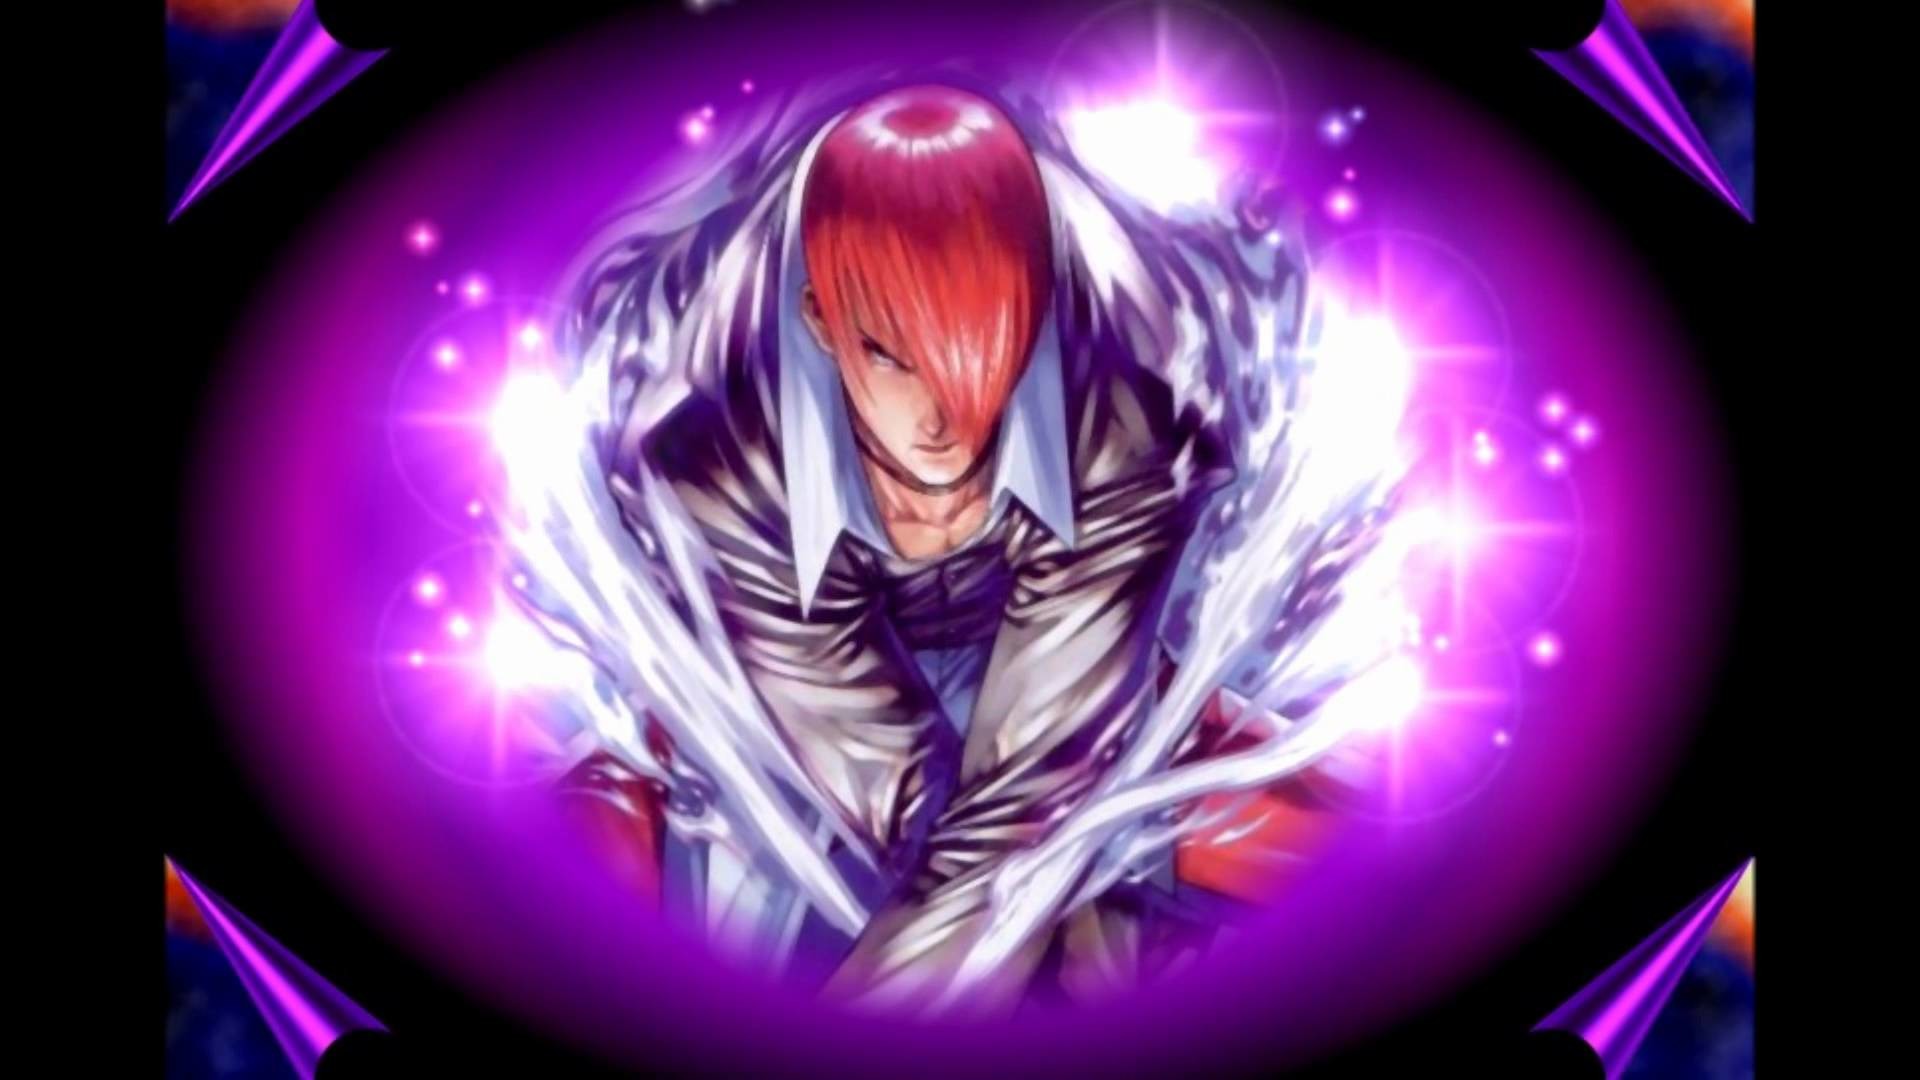 Iori Yagami Hd Wallpapers - King Of Fighters Soleil , HD Wallpaper & Backgrounds